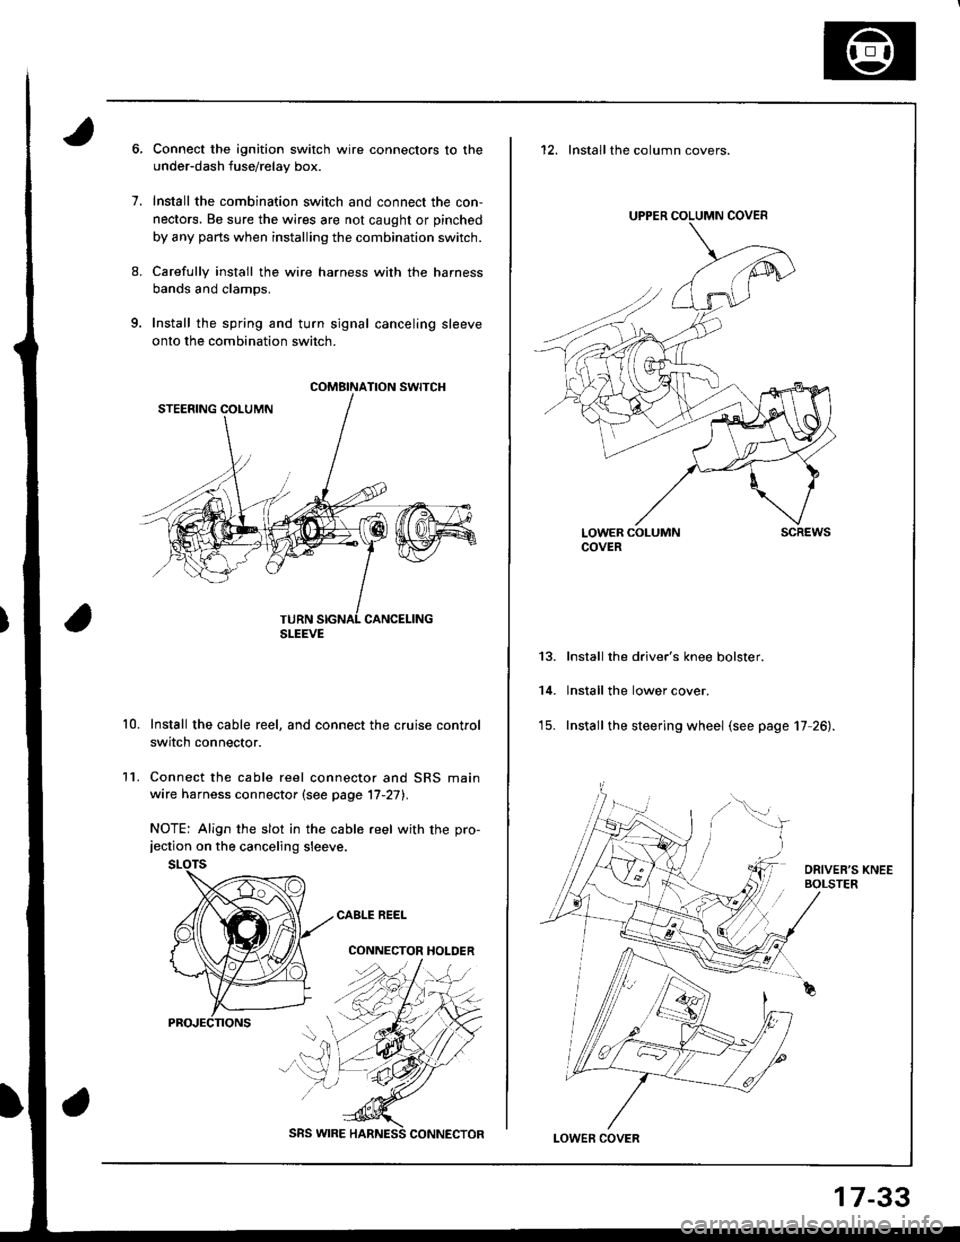 HONDA INTEGRA 1998 4.G Owners Manual 9.
1.
8.
11.
10.
Connect the ignition switch wire connectors to the
under-dash fuse/relay box.
Install the combination switch and connect the con,
nectors. Be sure the wires are not caught or pinched
